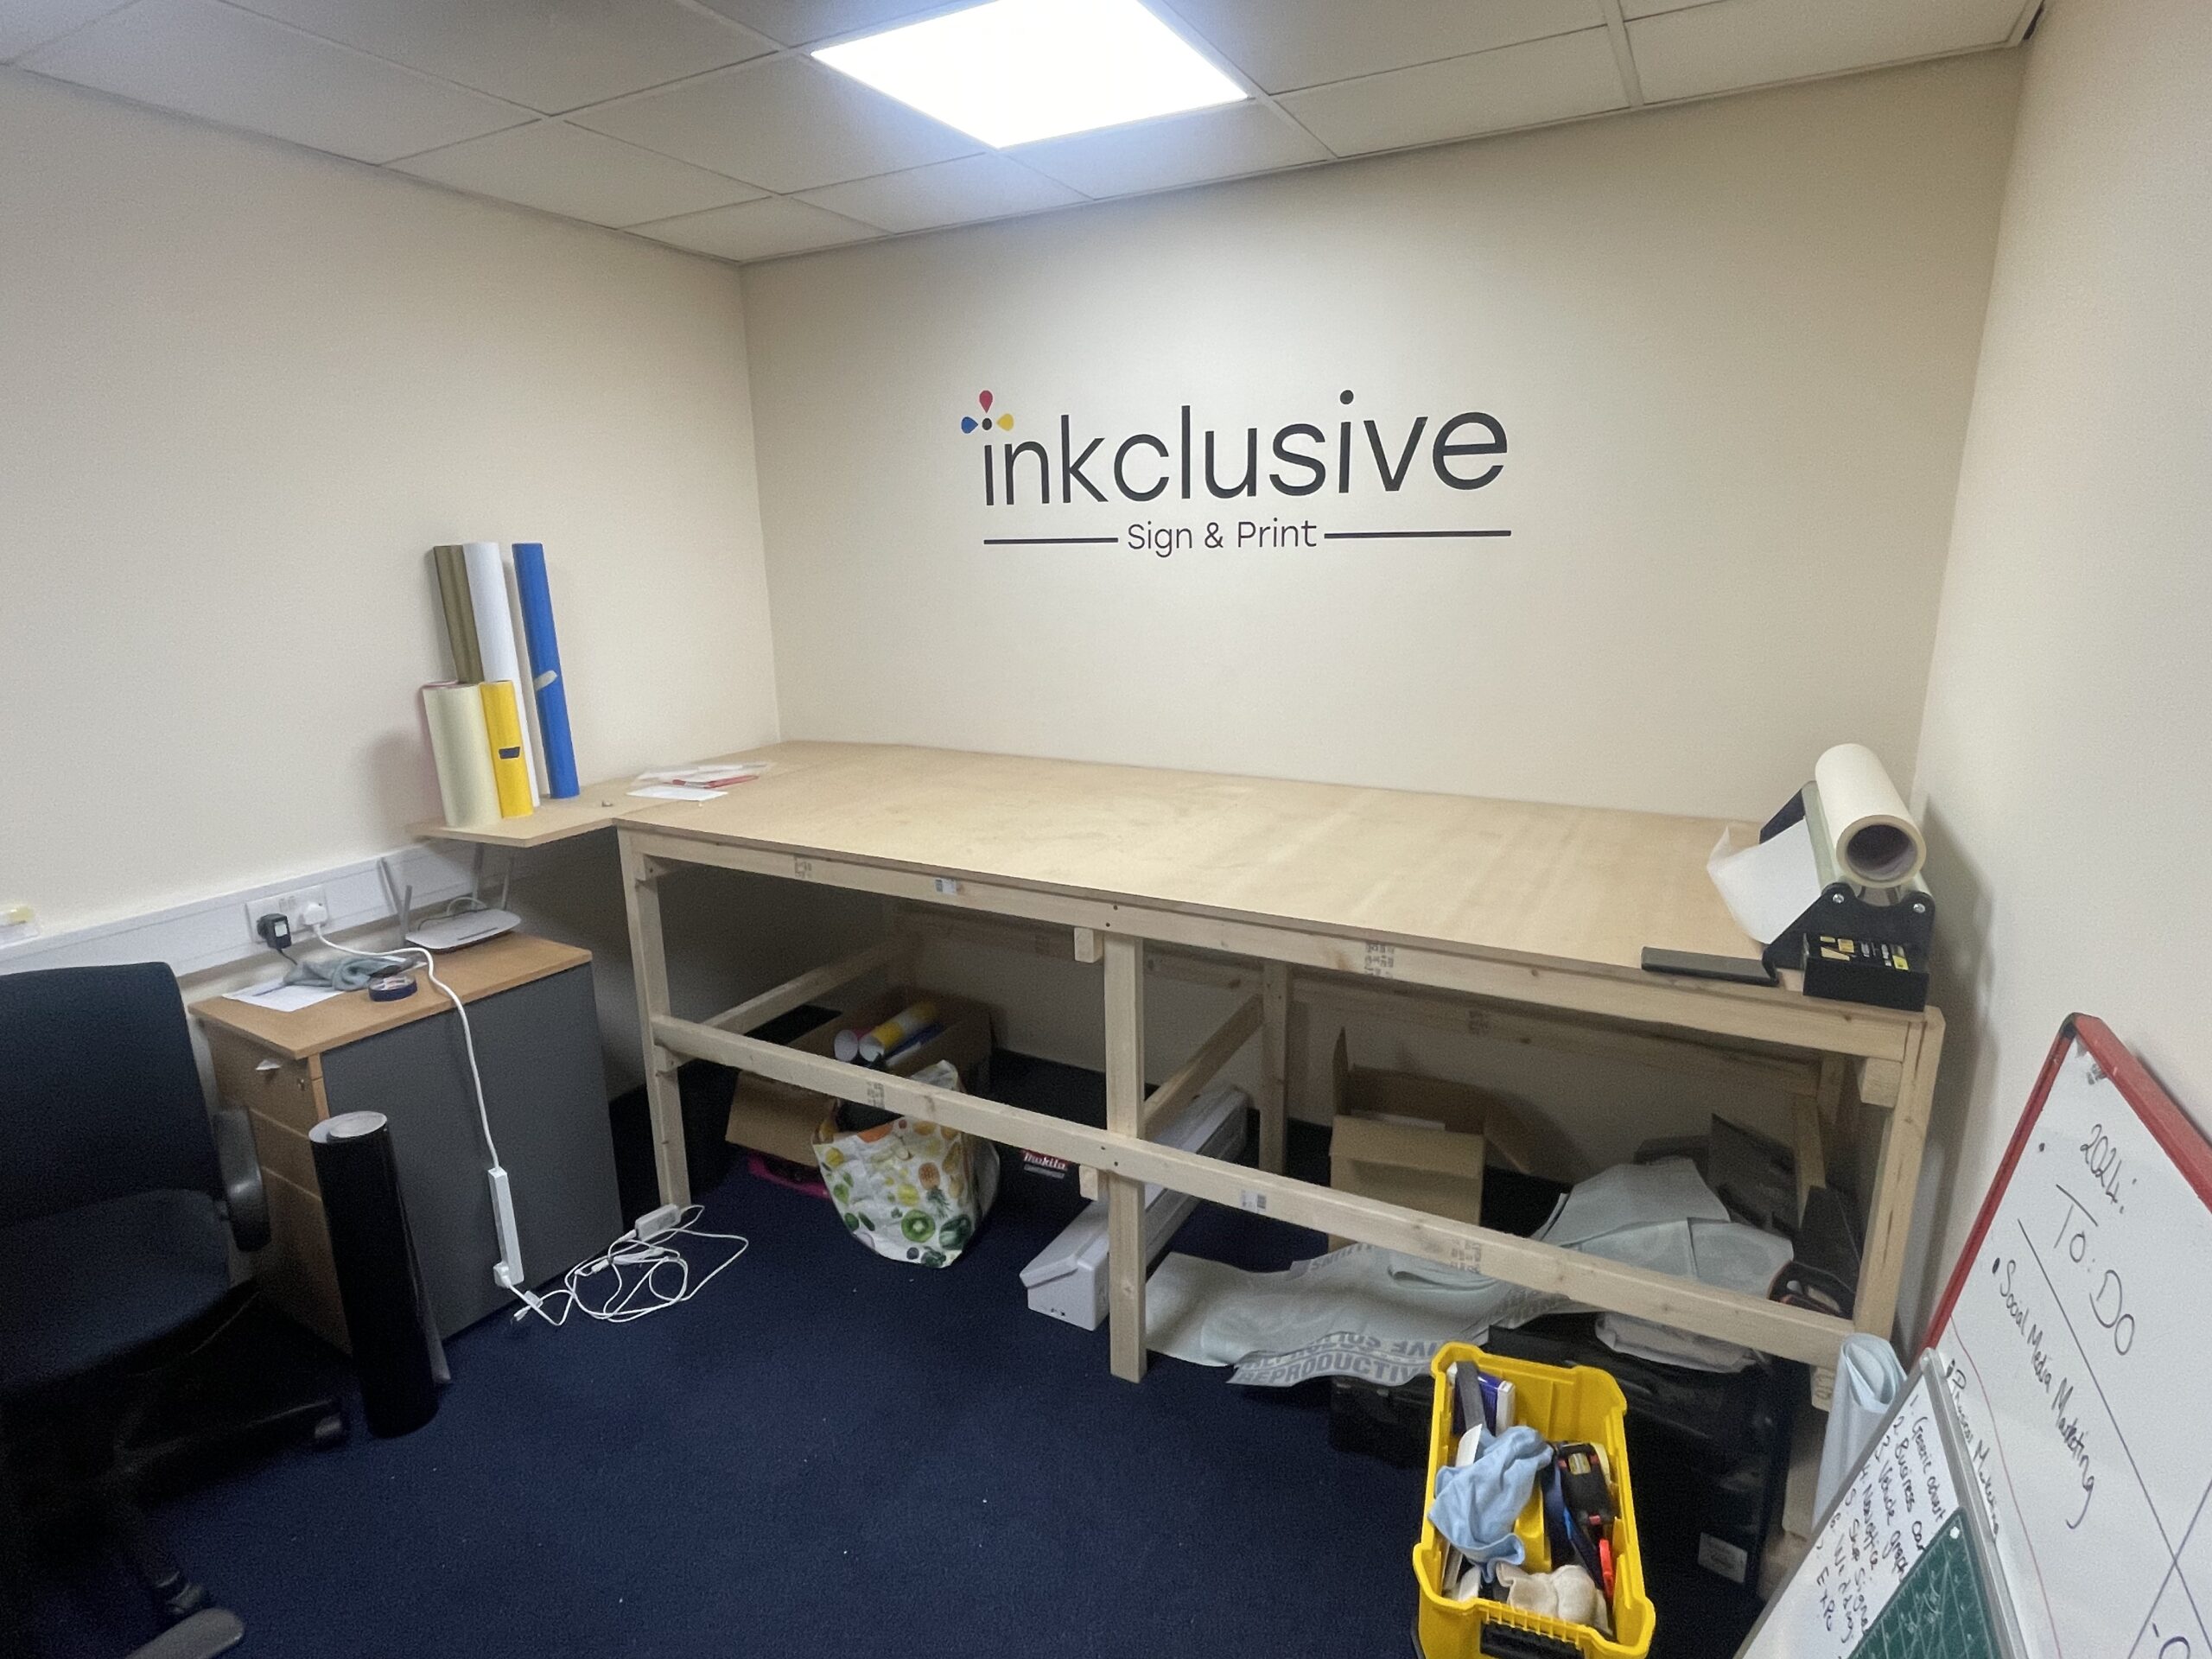 Our Journey at Inkclusive ltd